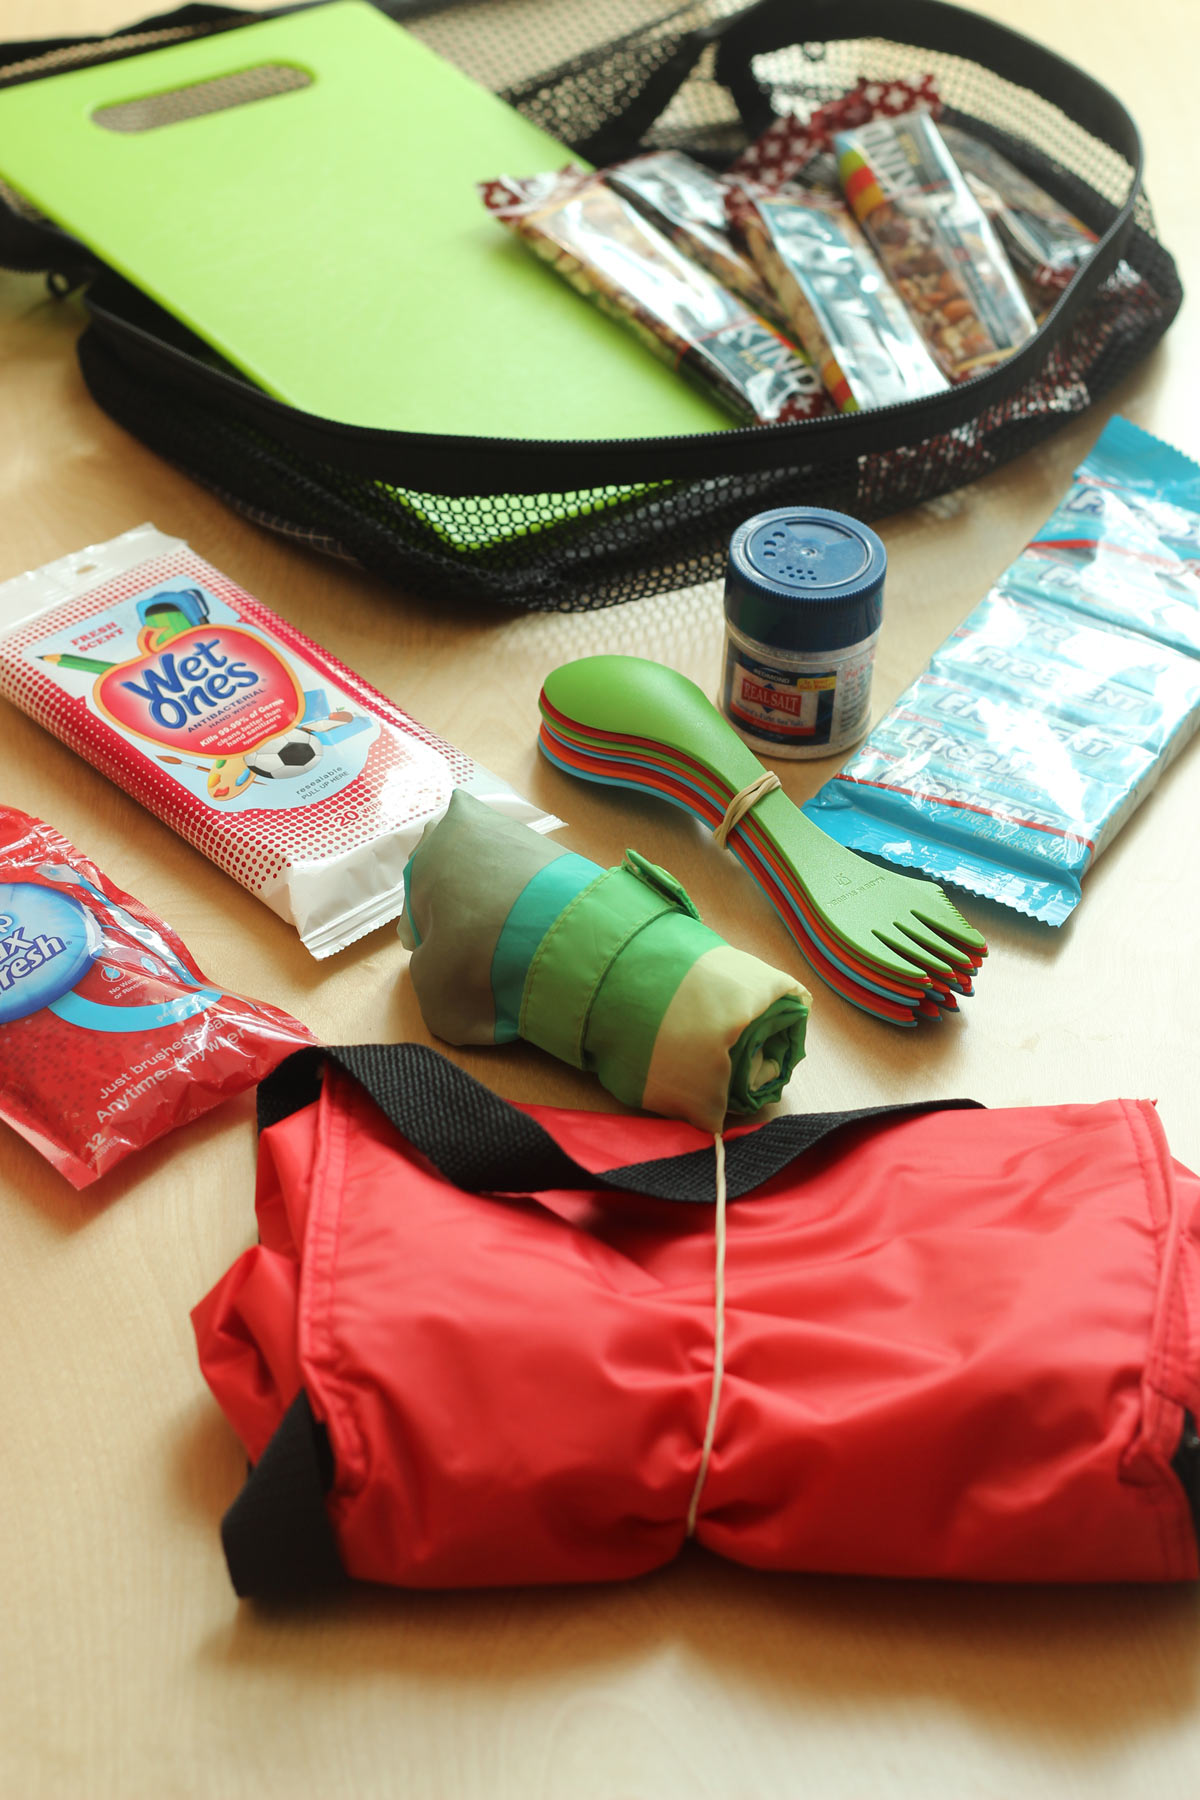 picnic pack of equipment including sporks, wipes, cooler bag, and cutting board.